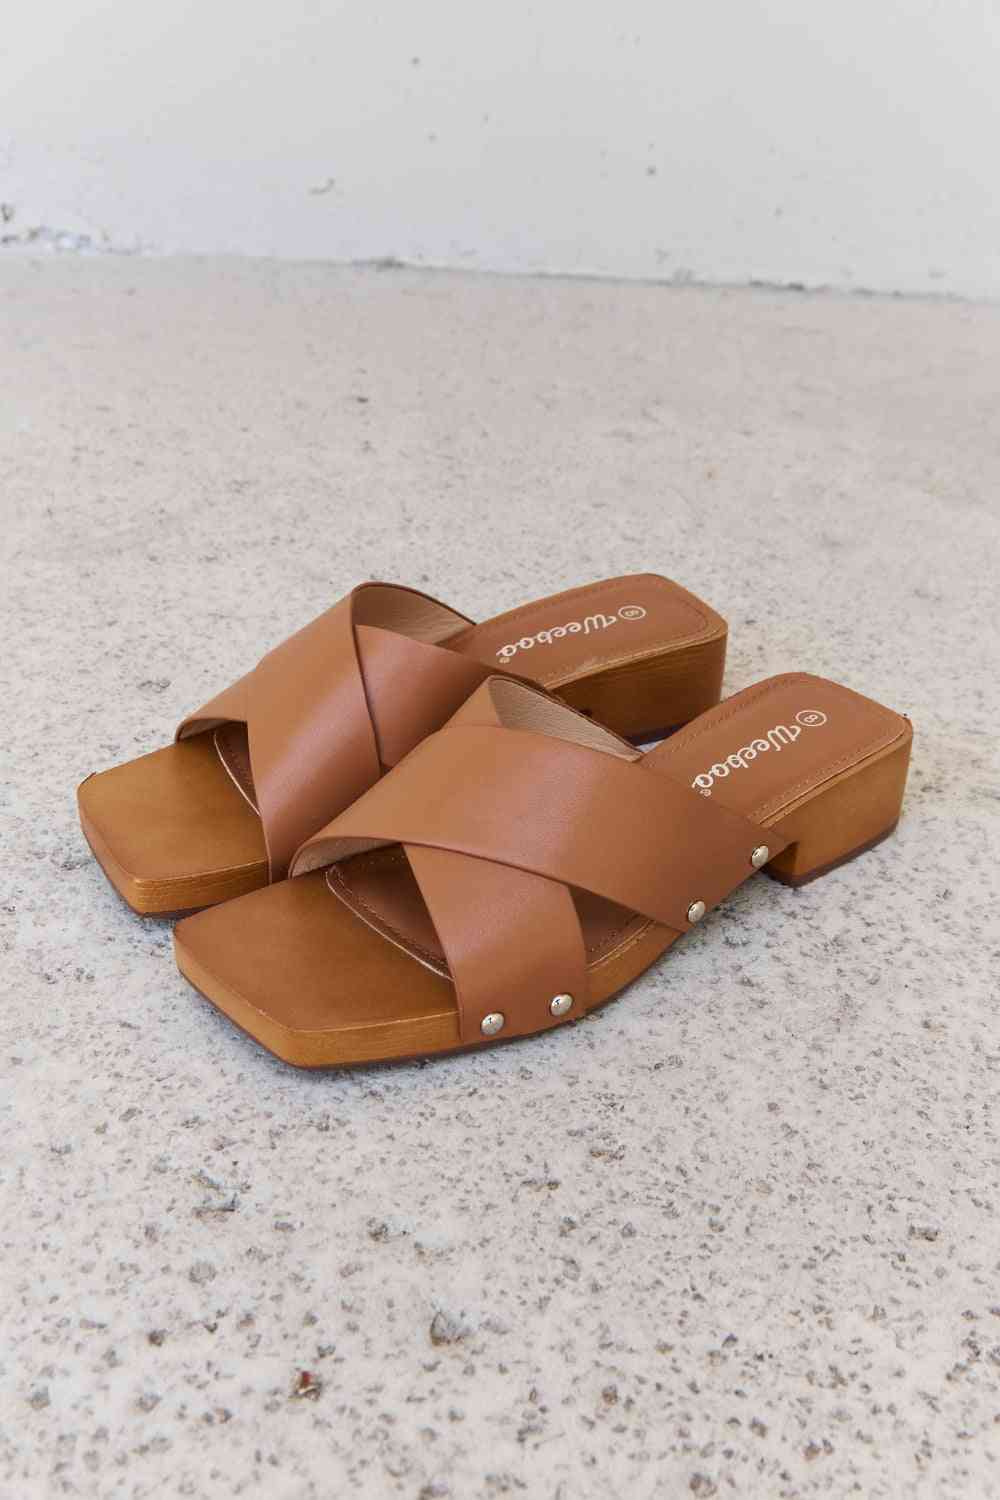 Sand Clogs Vegan Leather Womens Sandals | Hypoallergenic - Allergy Friendly - Naturally Free